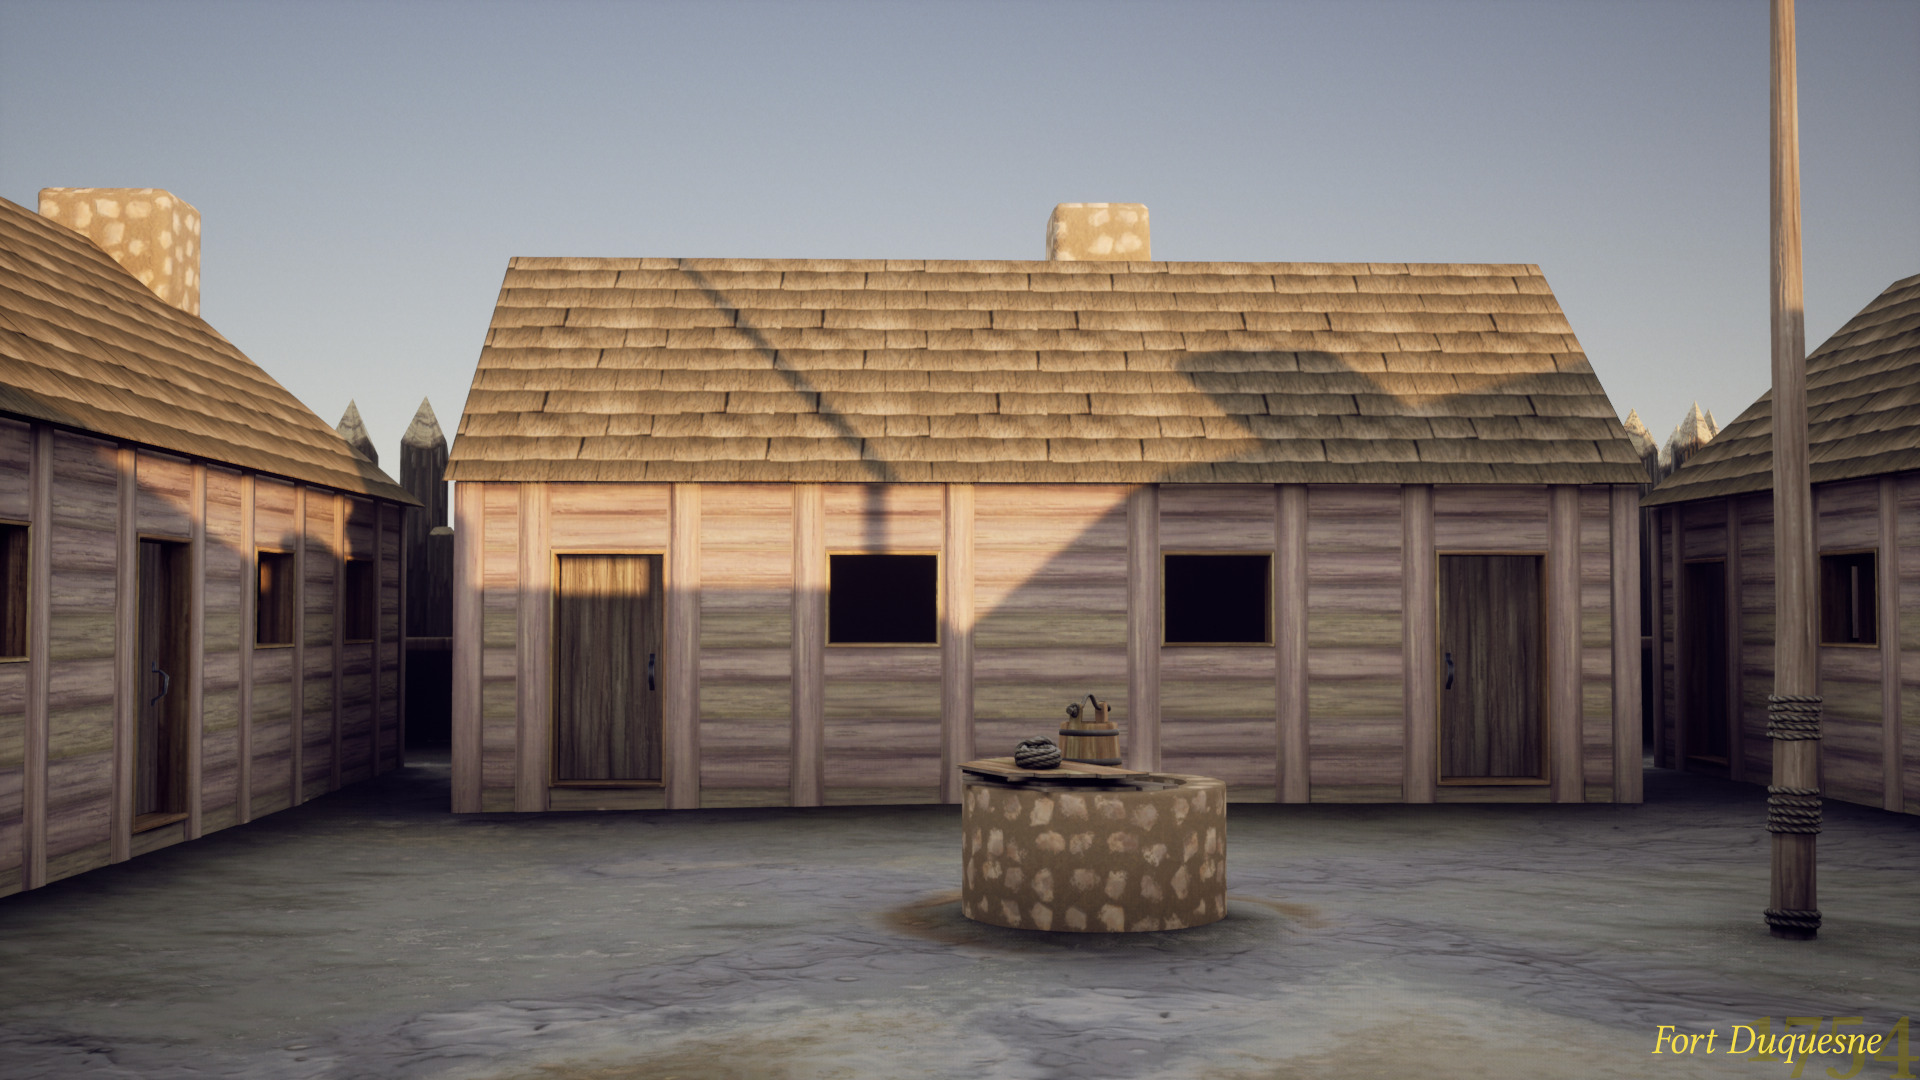 A 3D model of the interior courtyard of Fort Duquesne, a star-shaped wooden fort. A central well sits in the center of the courtyard.